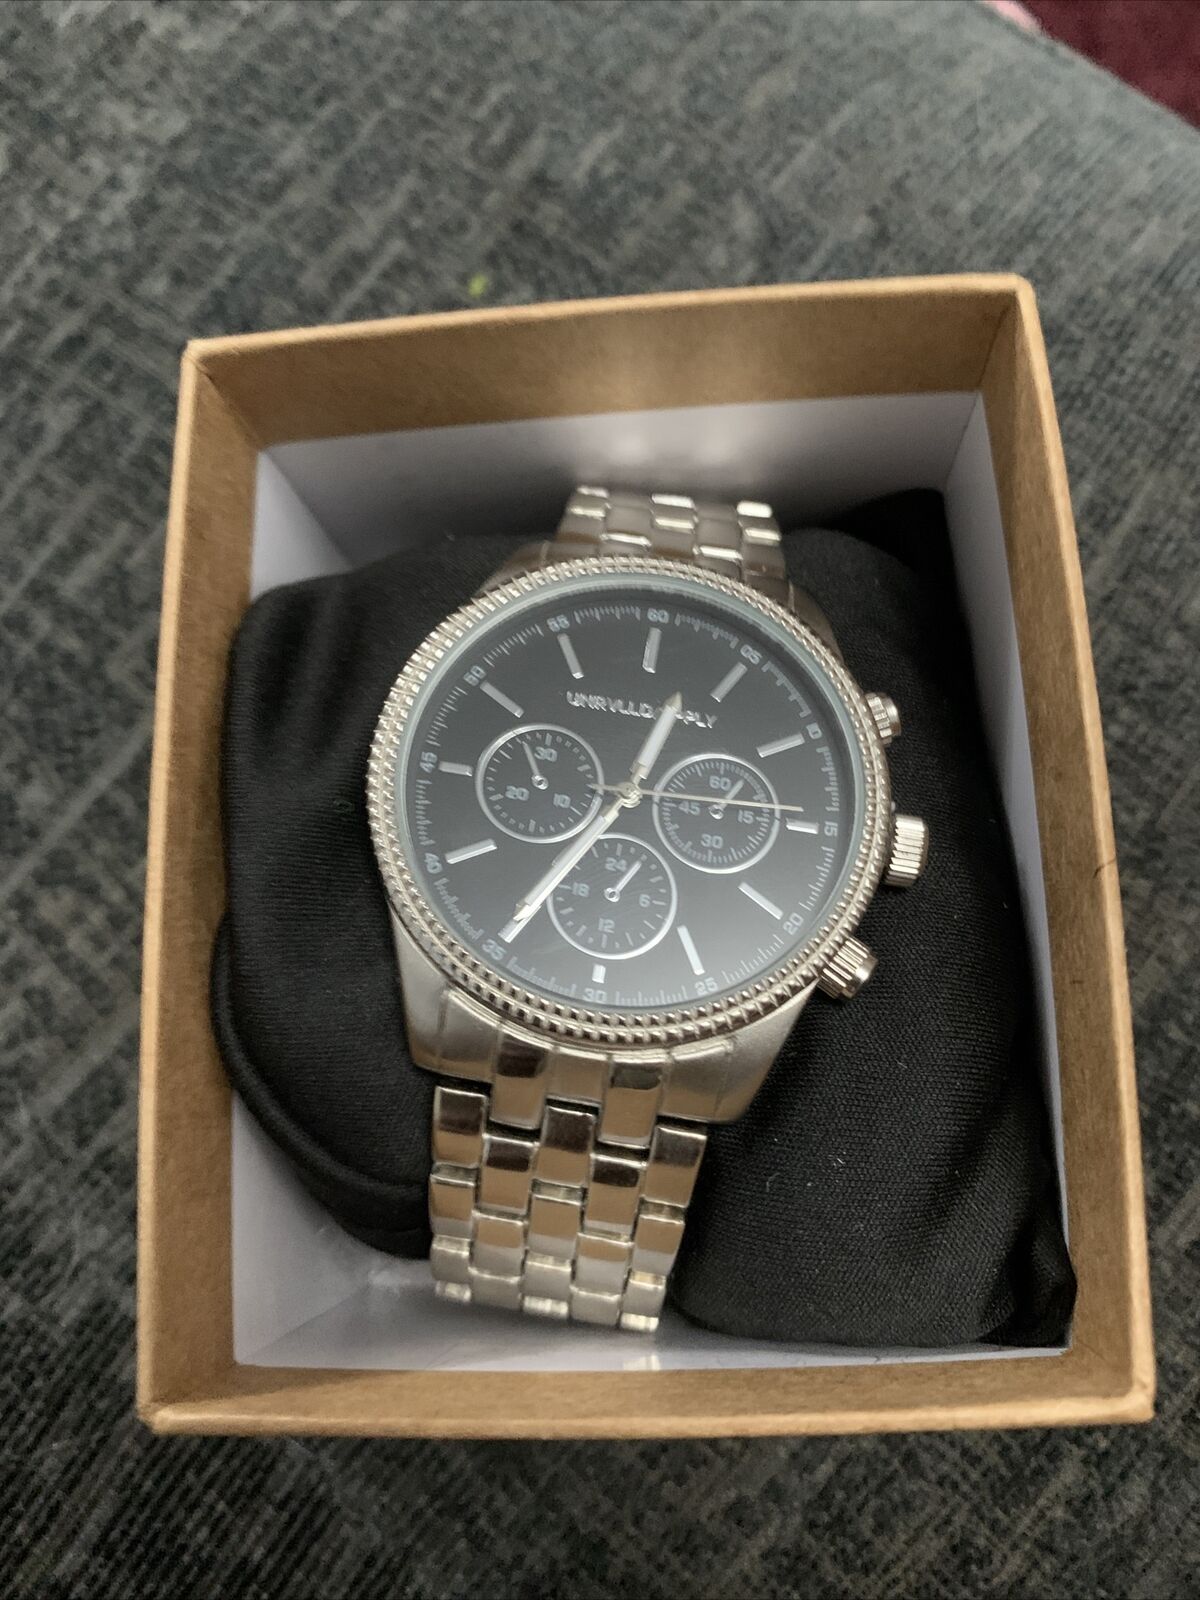 Asos Design Watch With Black Dial And Silver Tone - BNIB Never Worn